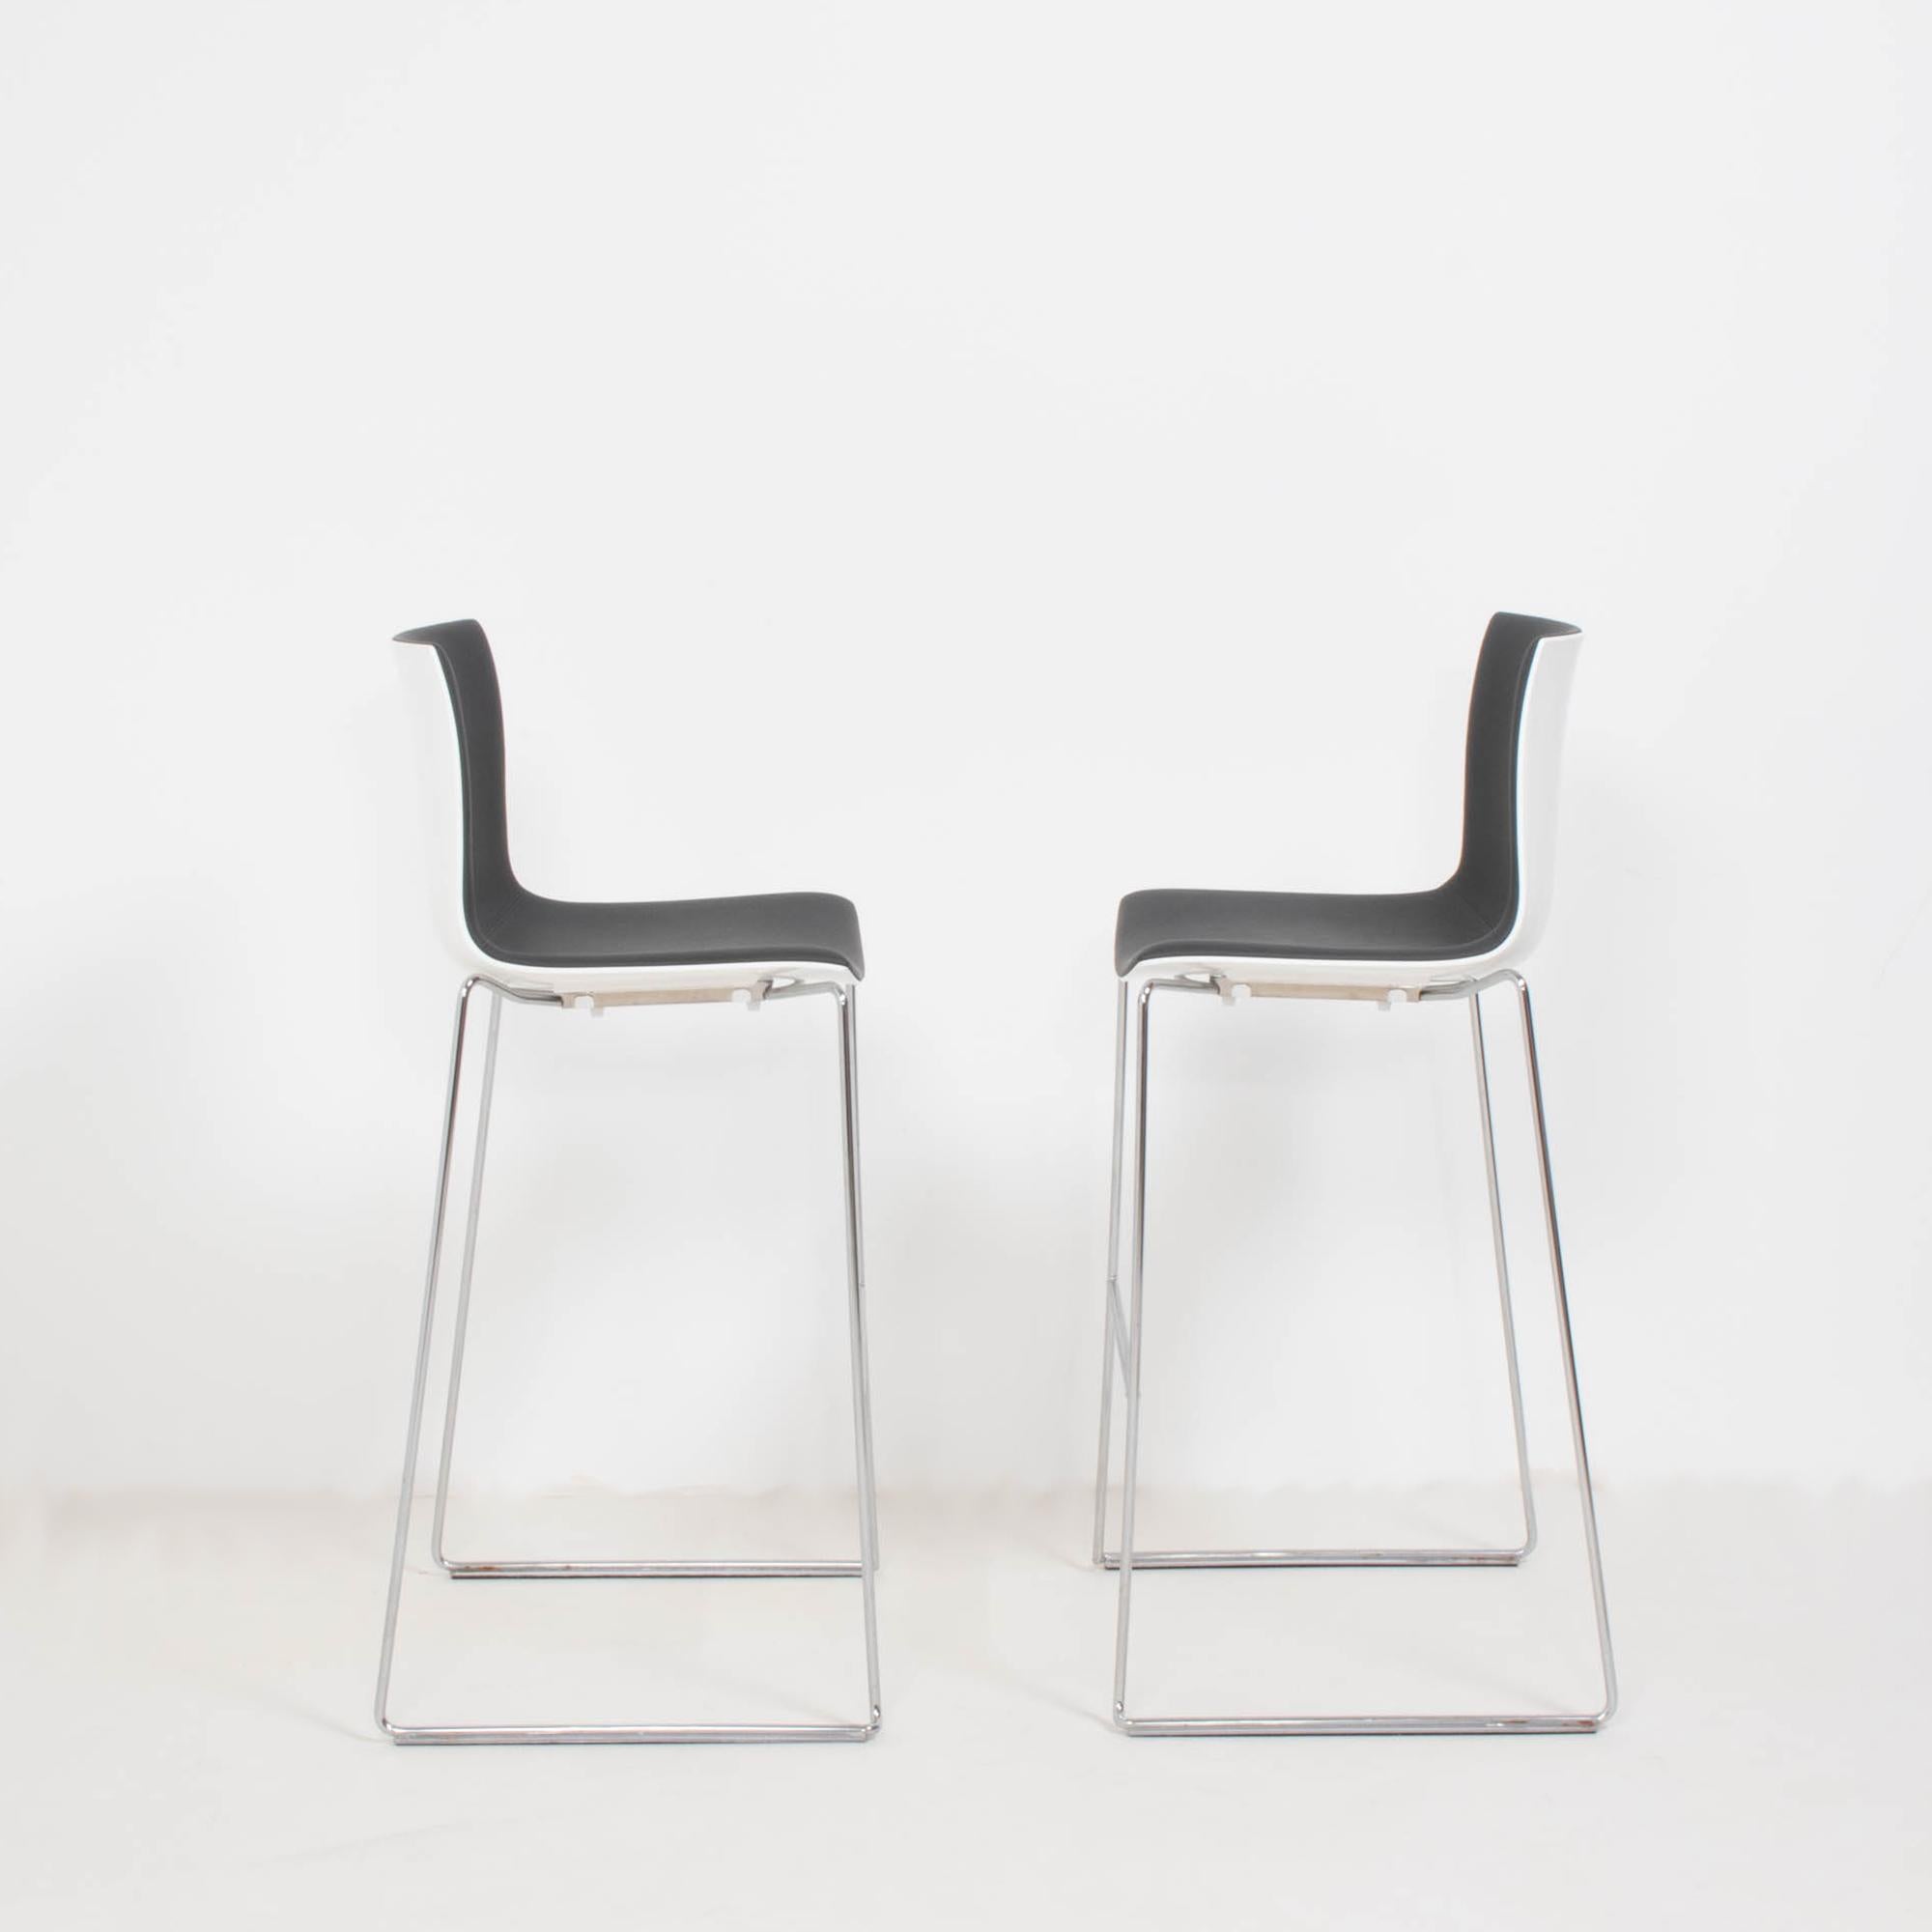 Italian Arper by Antti Kotilainen Aava Grey and White Bar Stools, Set of 2, 2013